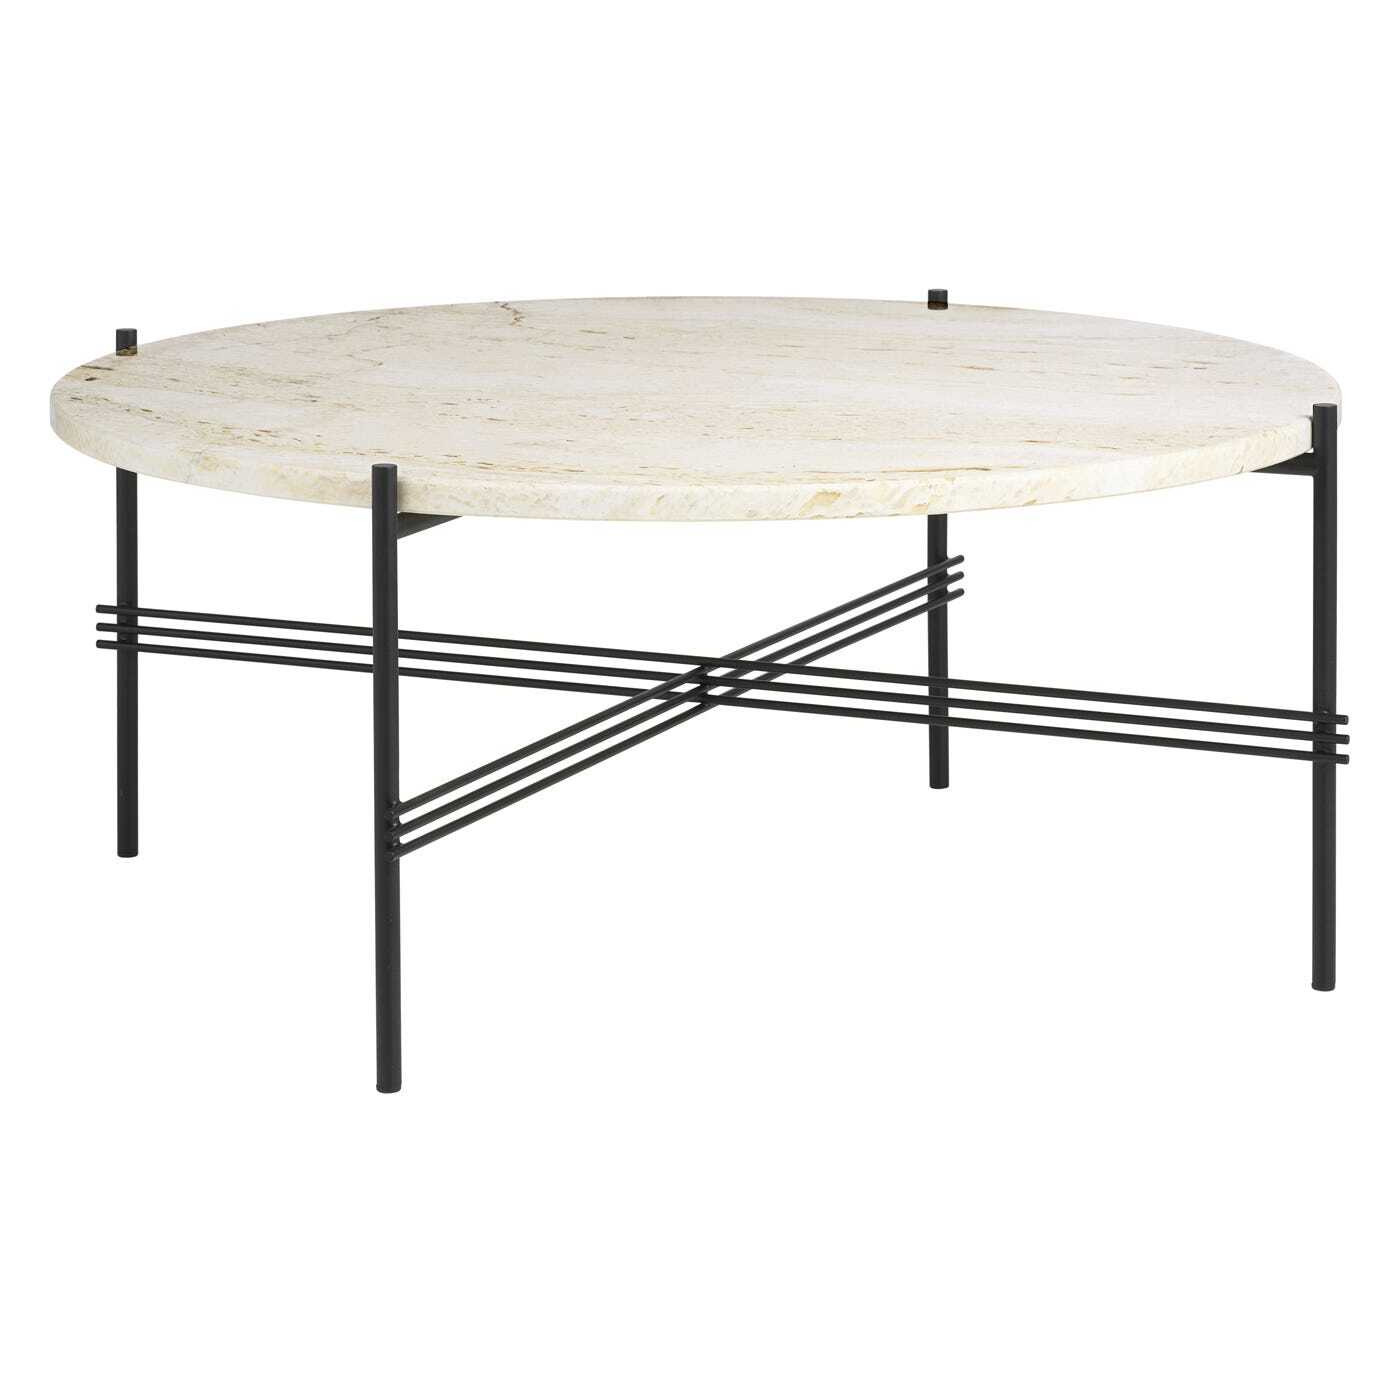 Gubi TS Coffee Table Large in Neutral White Travertine - image 1